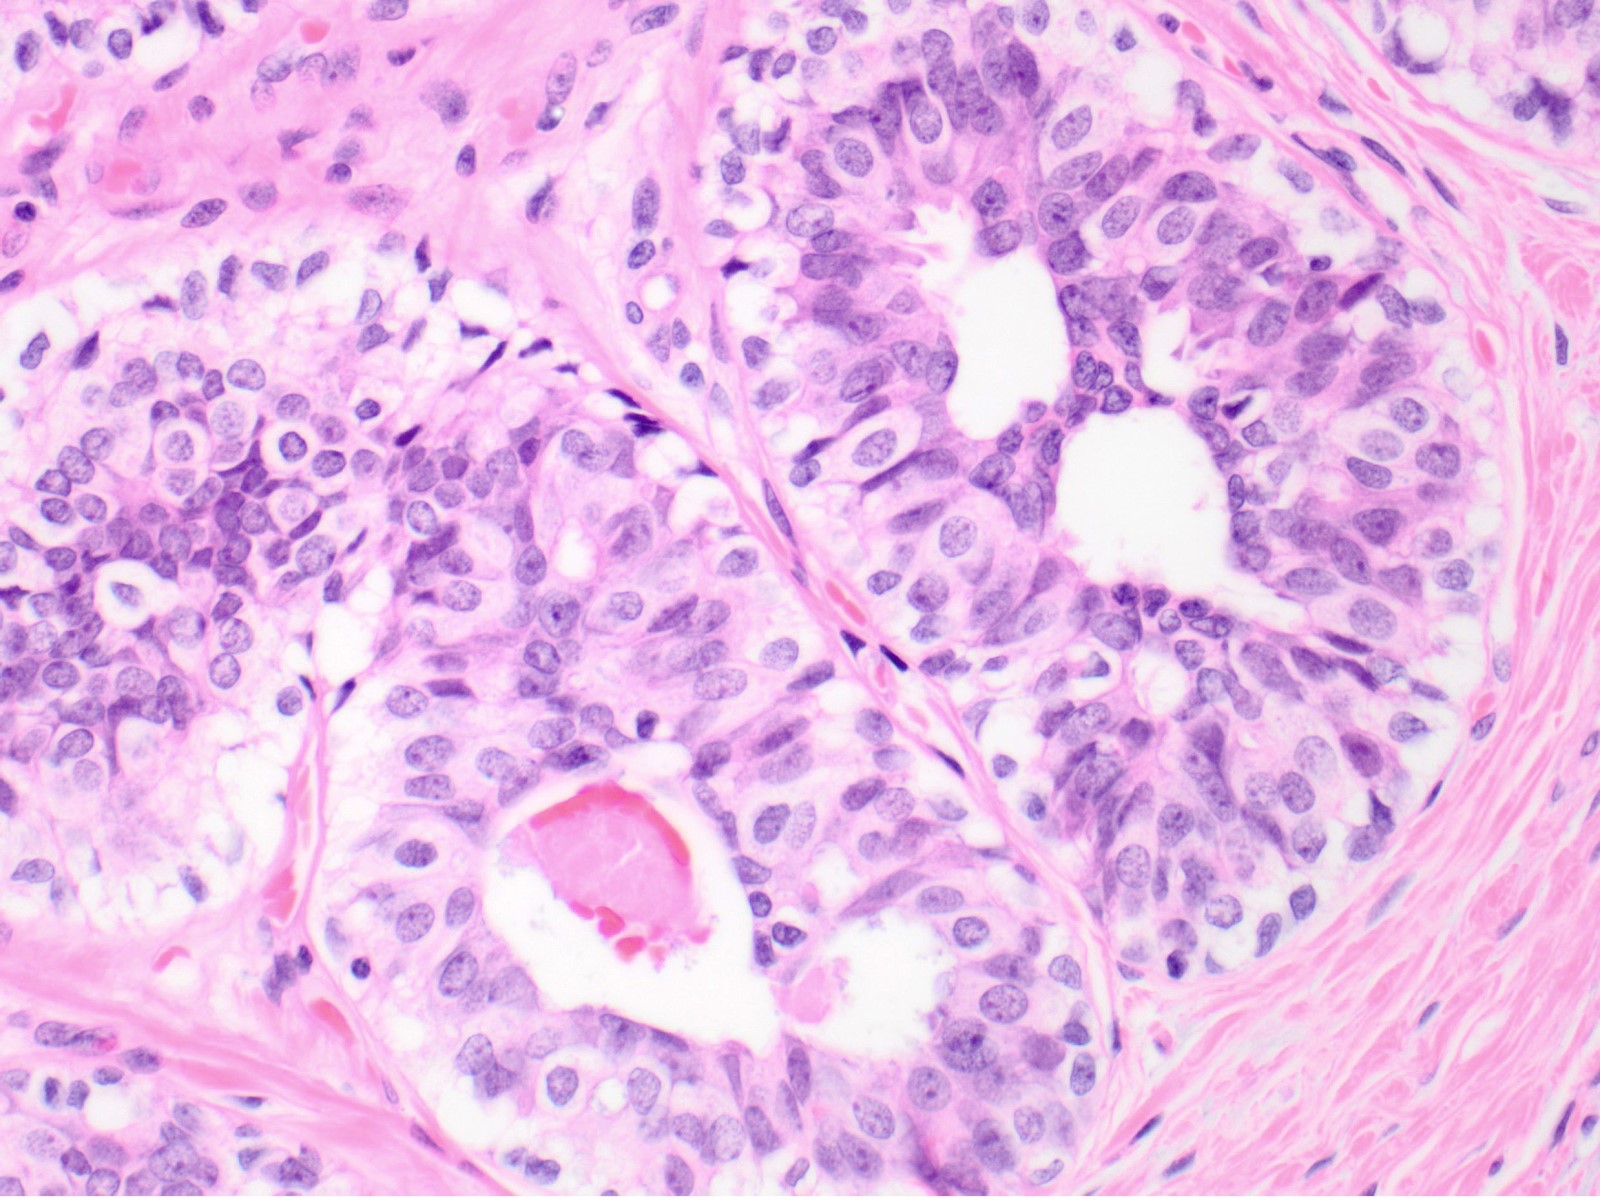 Intraductal papilloma ductal hyperplasia Intraductal papilloma with florid usual ductal hyperplasia